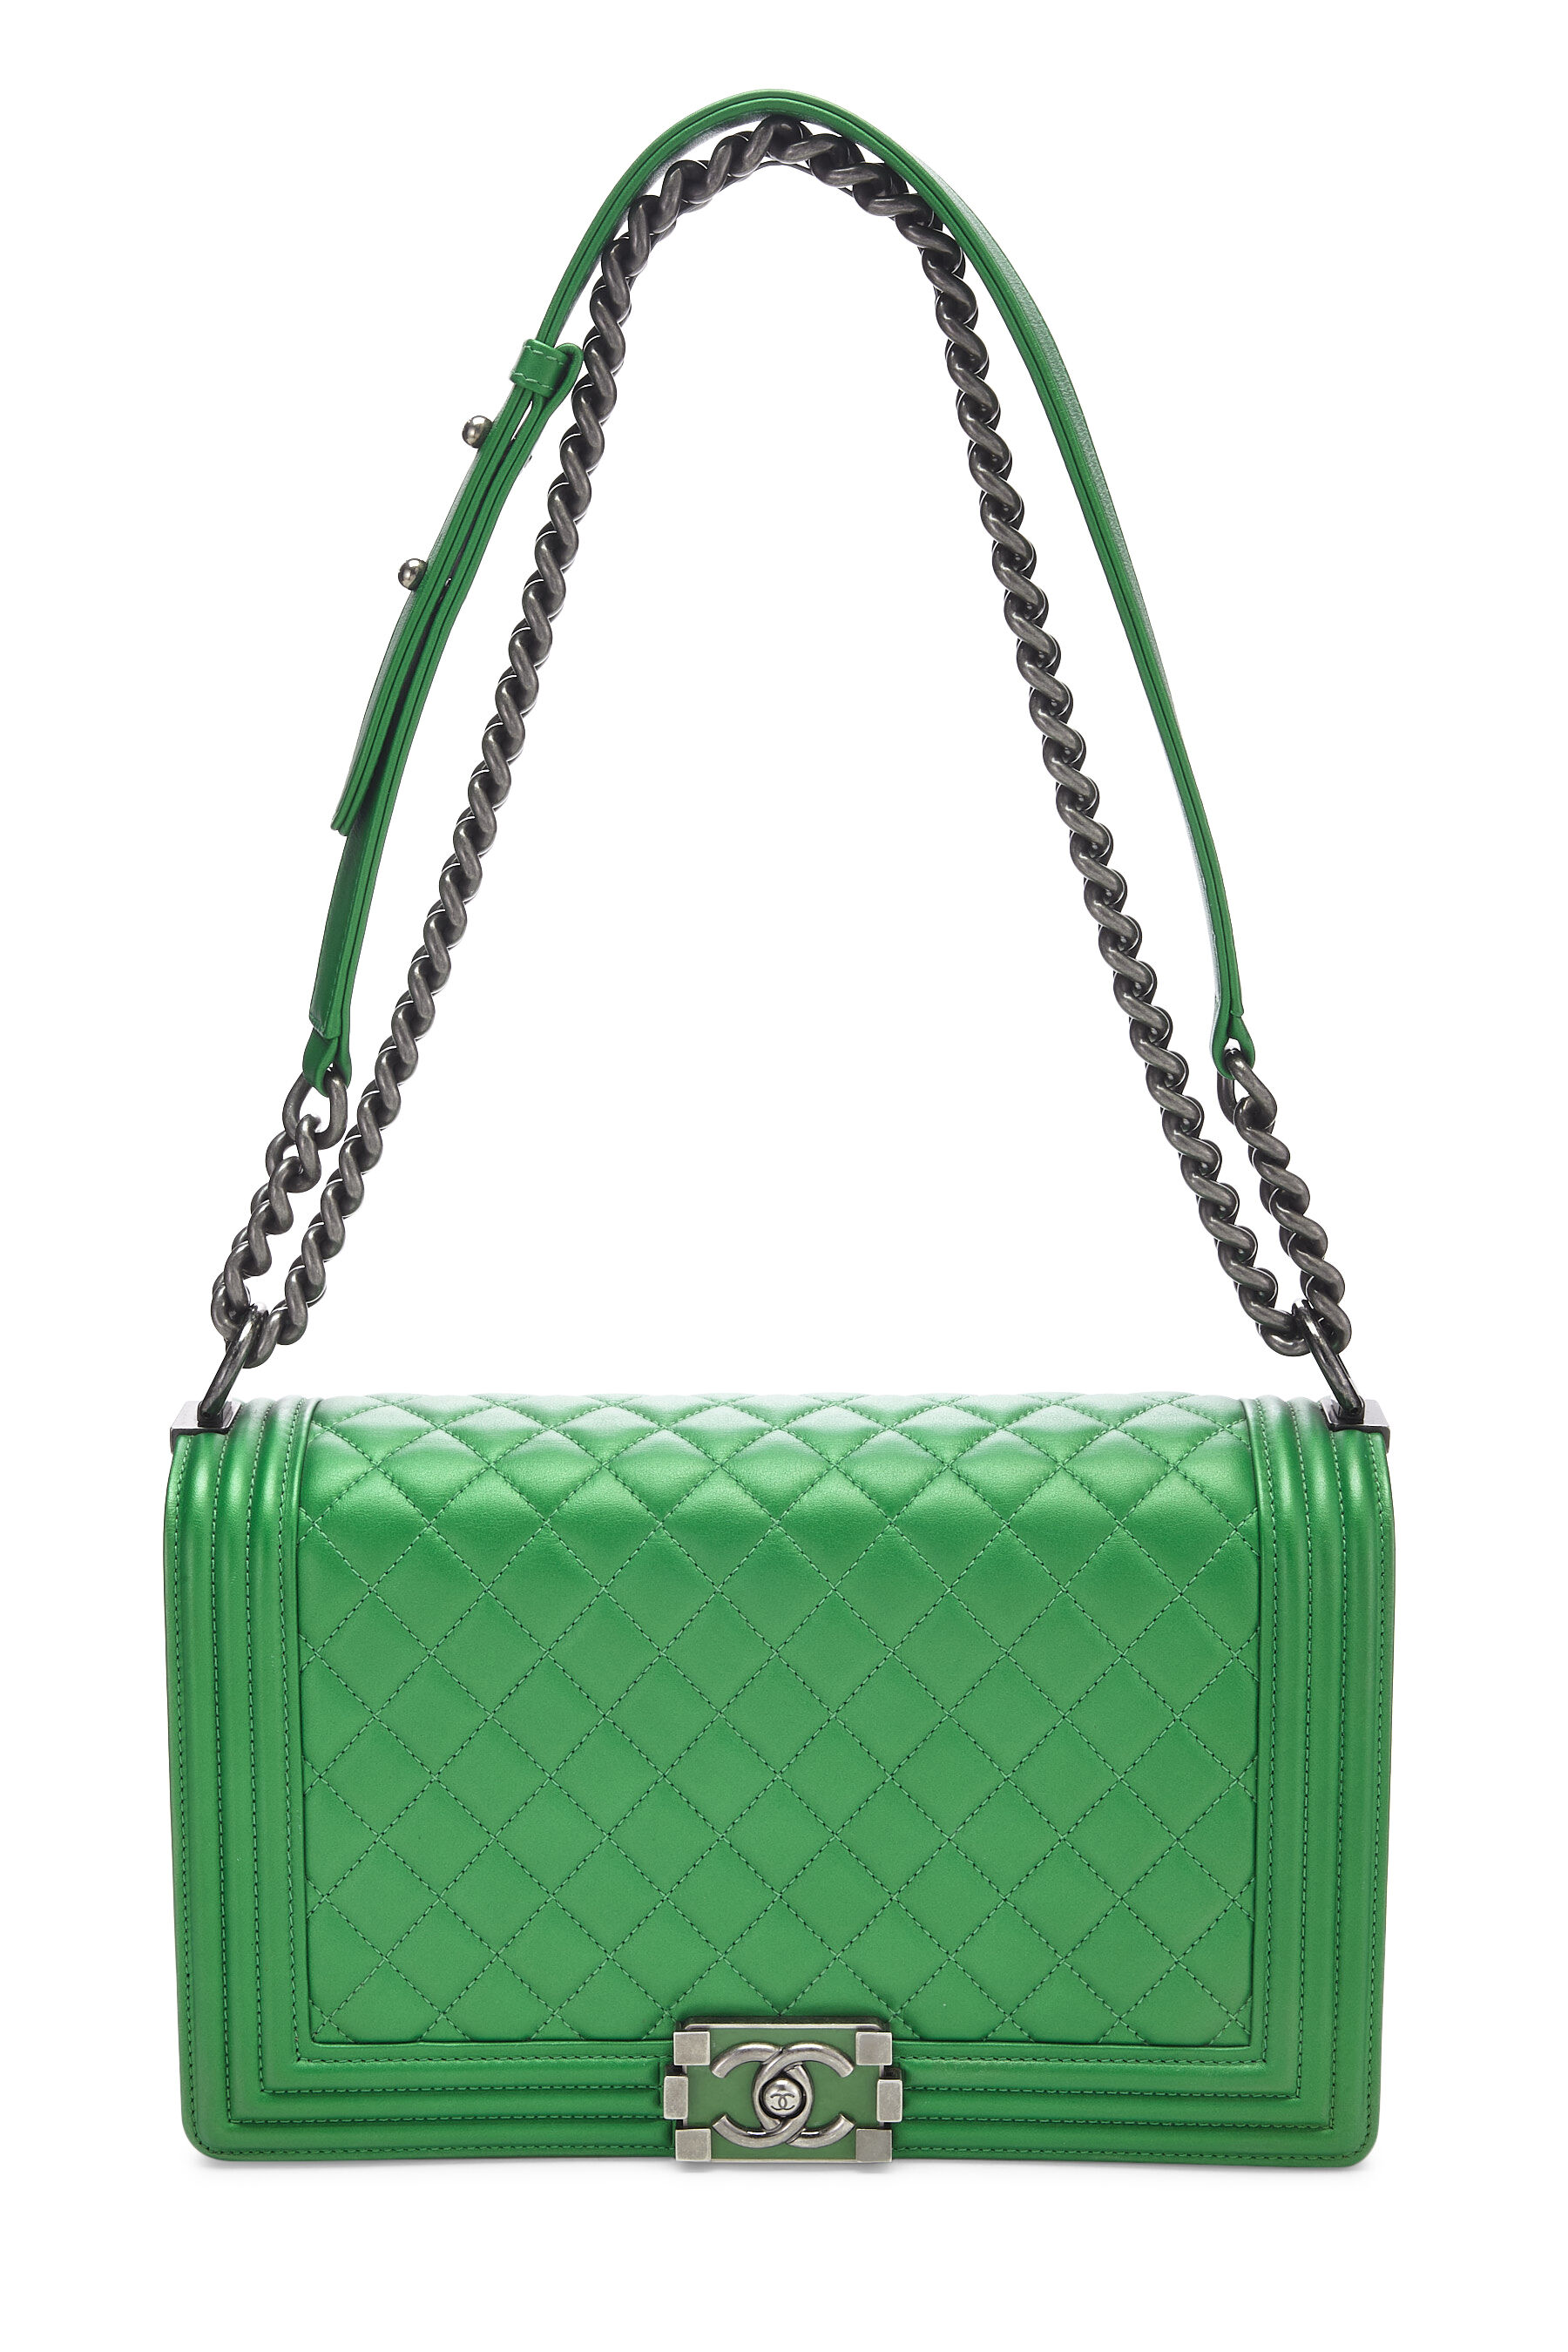 Chanel Metallic Green Quilted Lambskin Boy Bag Large Q6B01A1IG7006